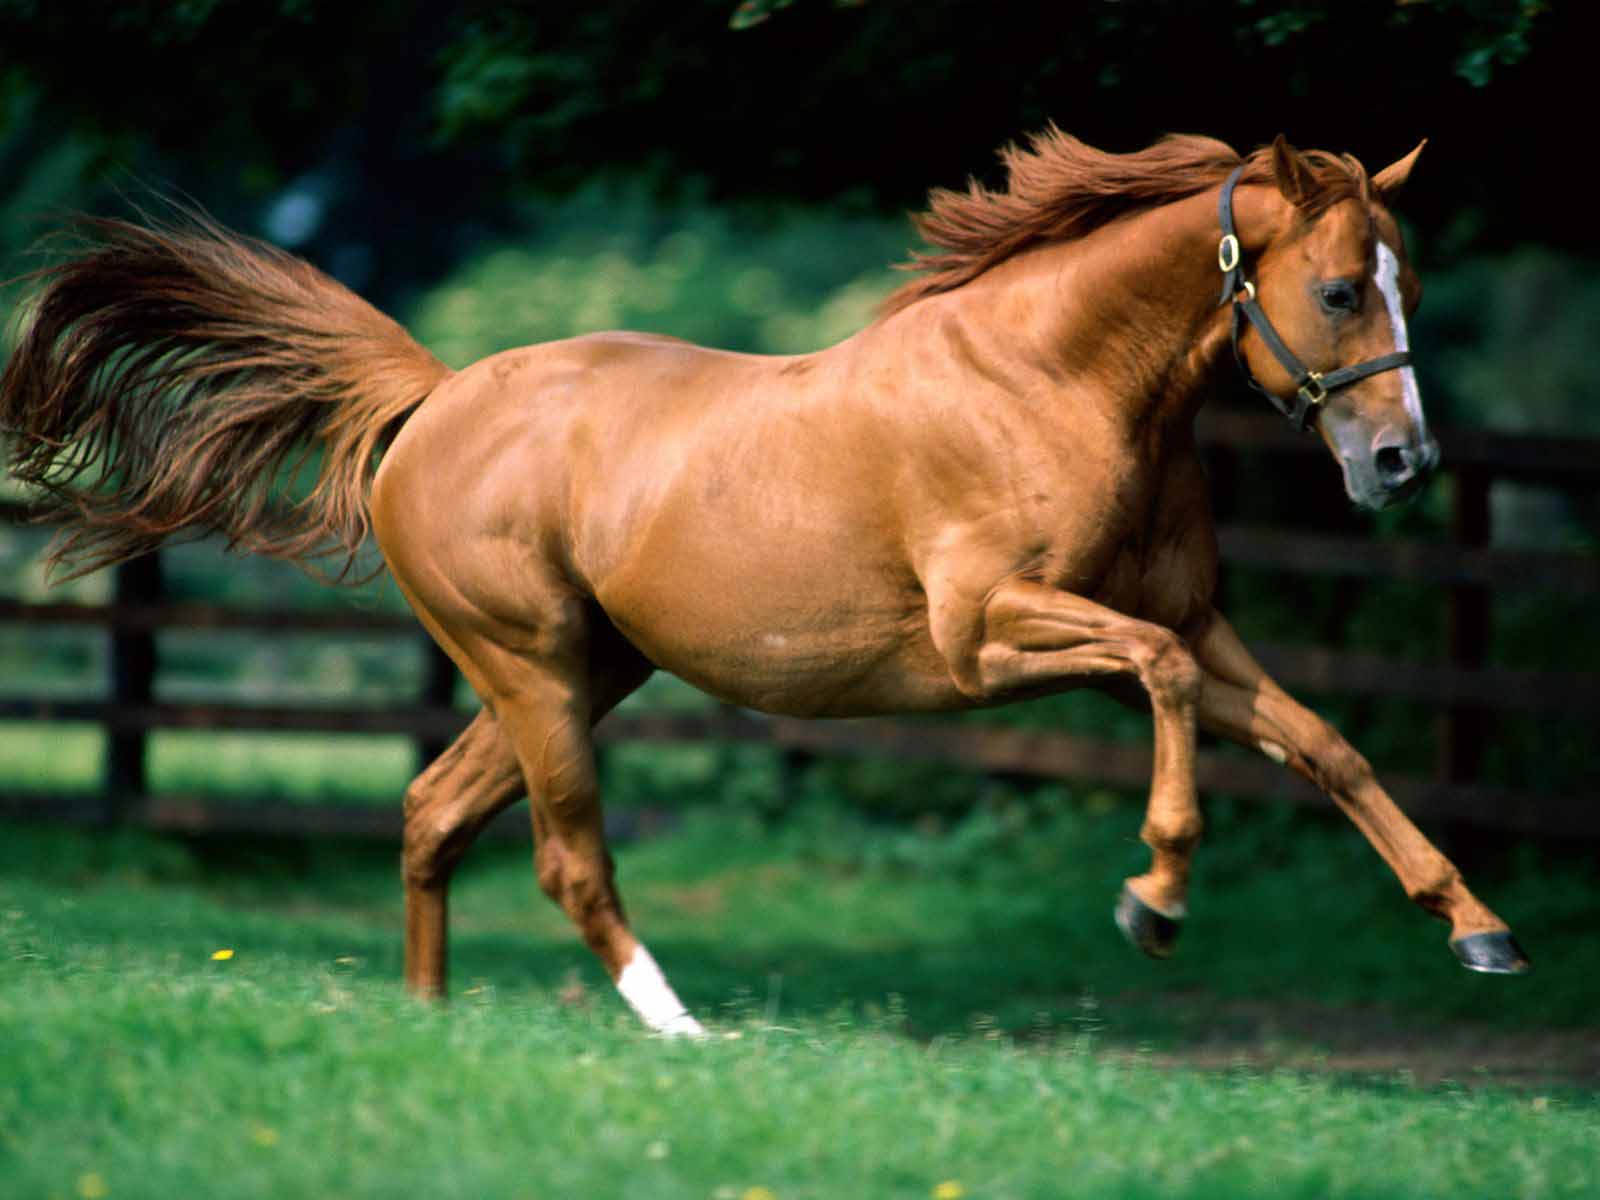 HD Wallpapers: Horse Wallpapers